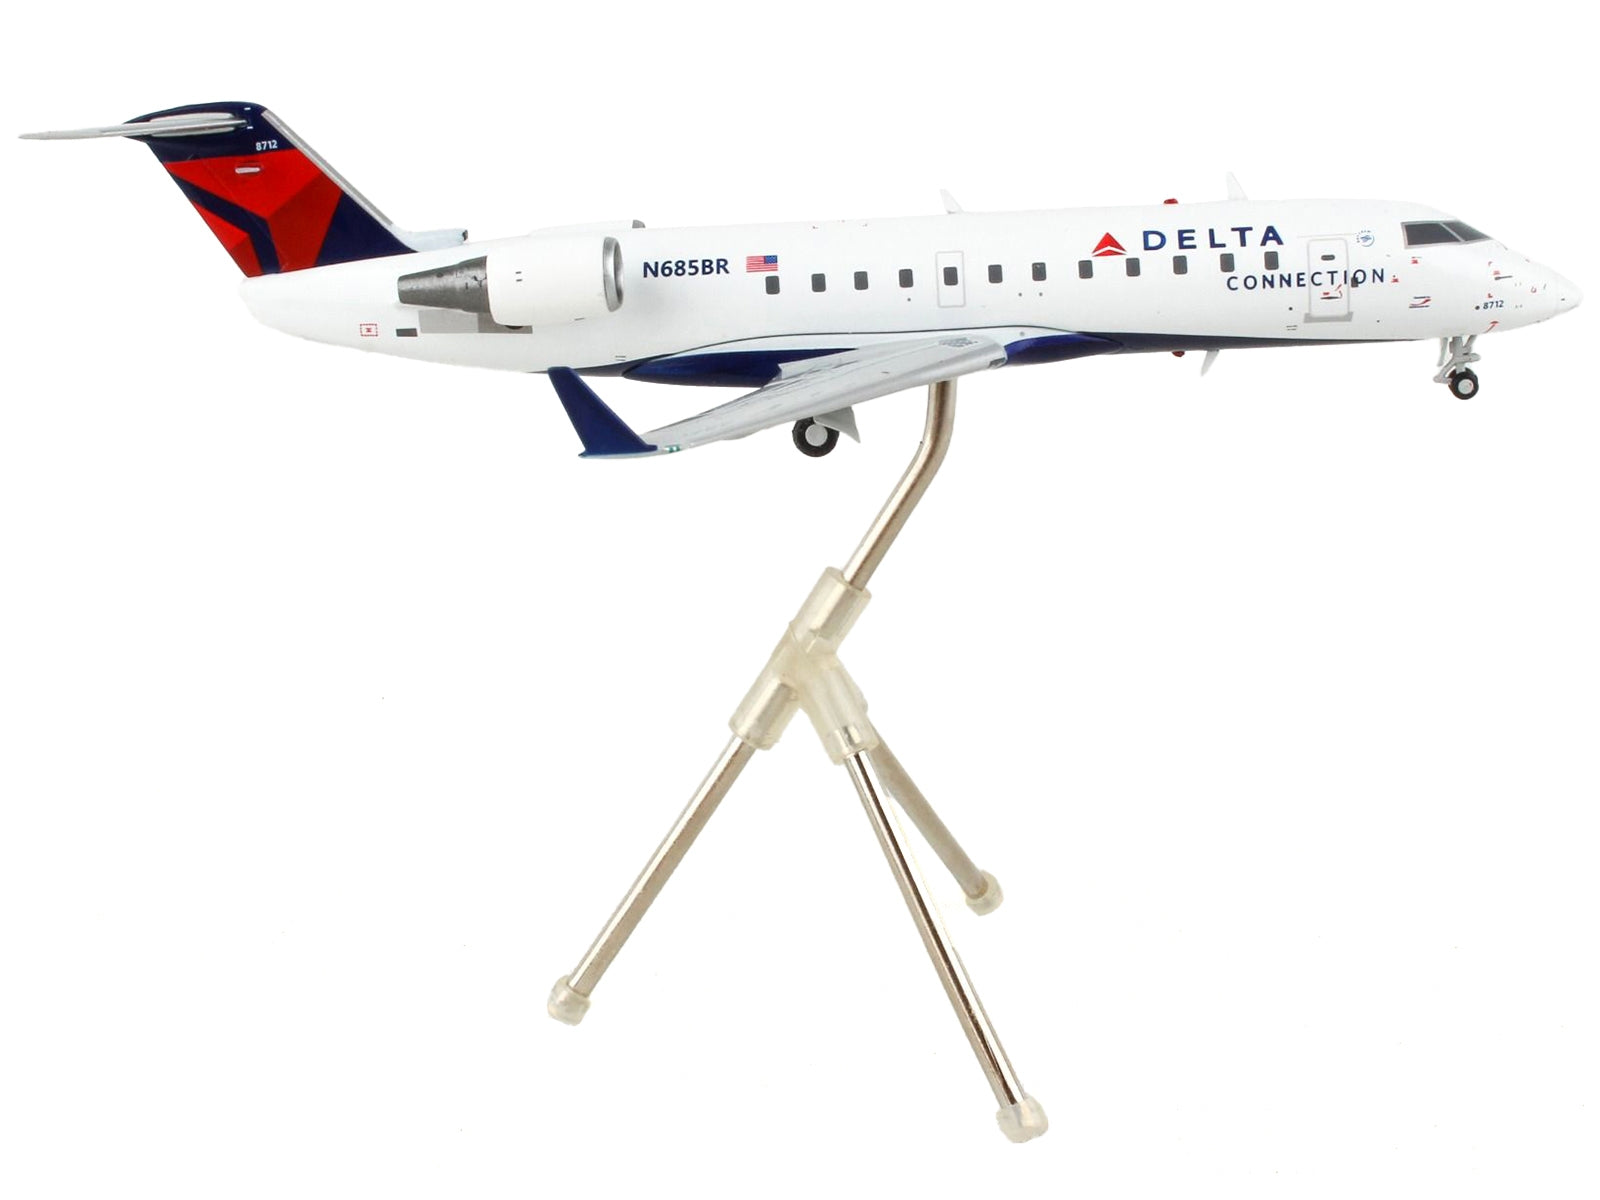 ombardier CRJ200 Commercial Aircraft "Delta Air Lines - Delta Connection" White with Blue and Red Tail